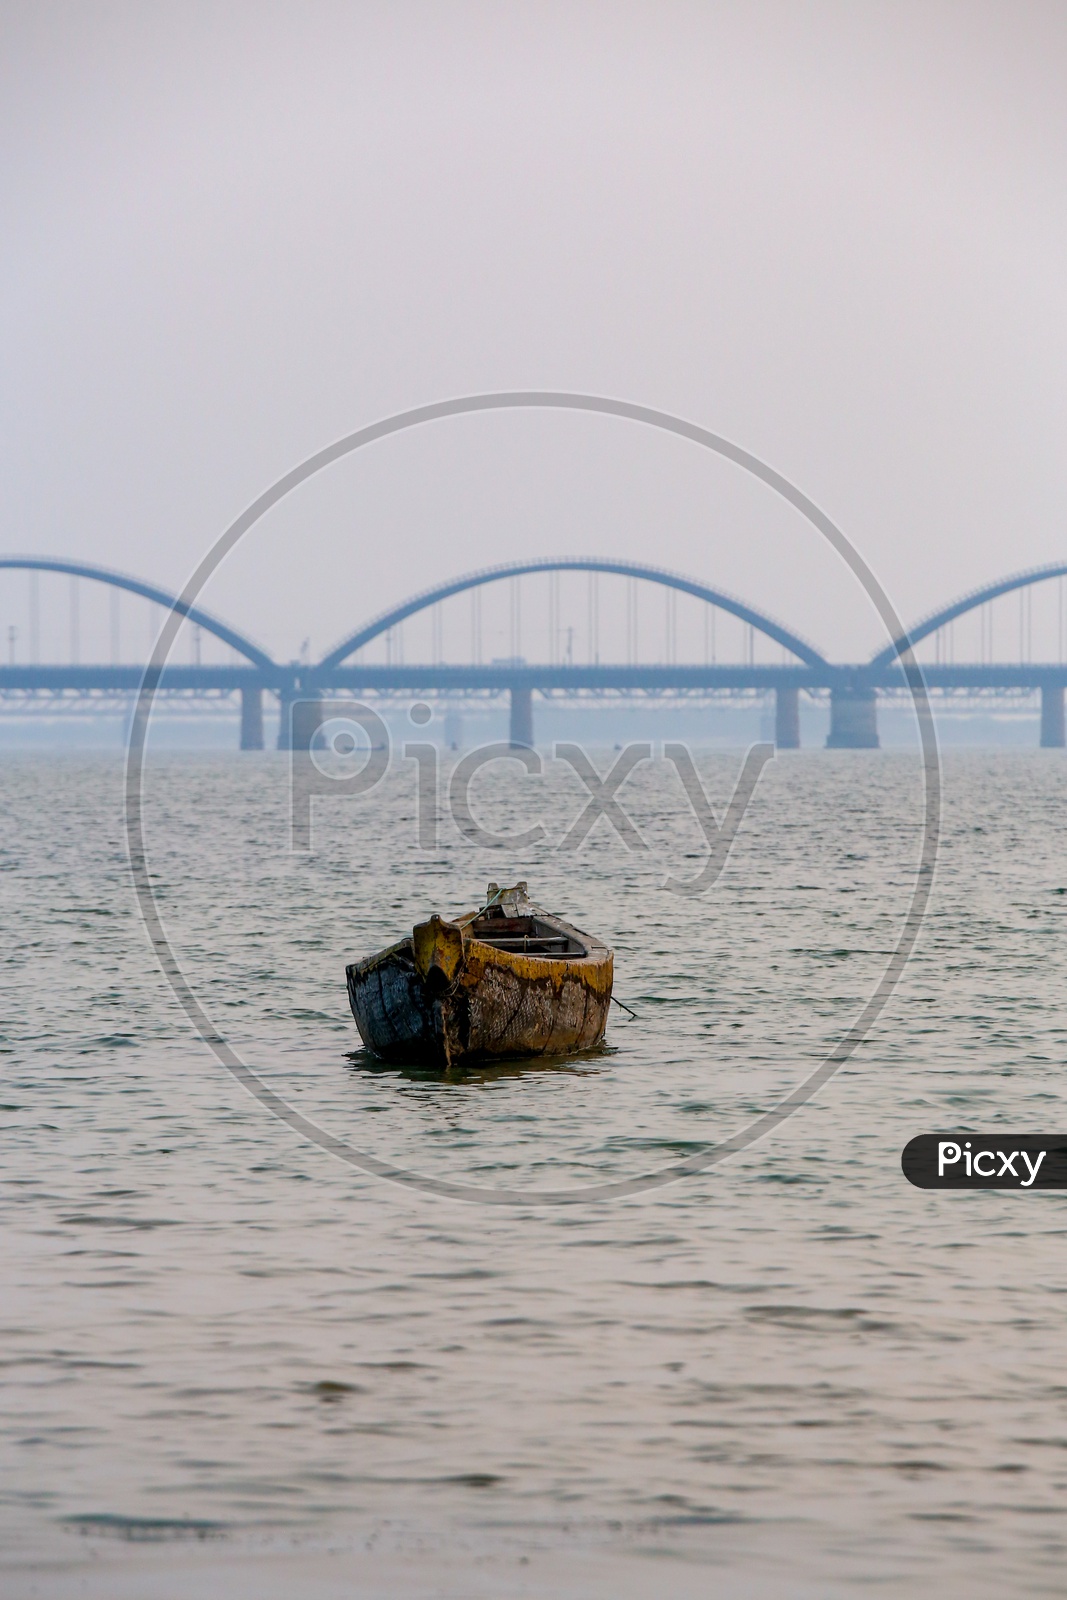 Fishing Boats on Godavari River With Arch Bridge in Background